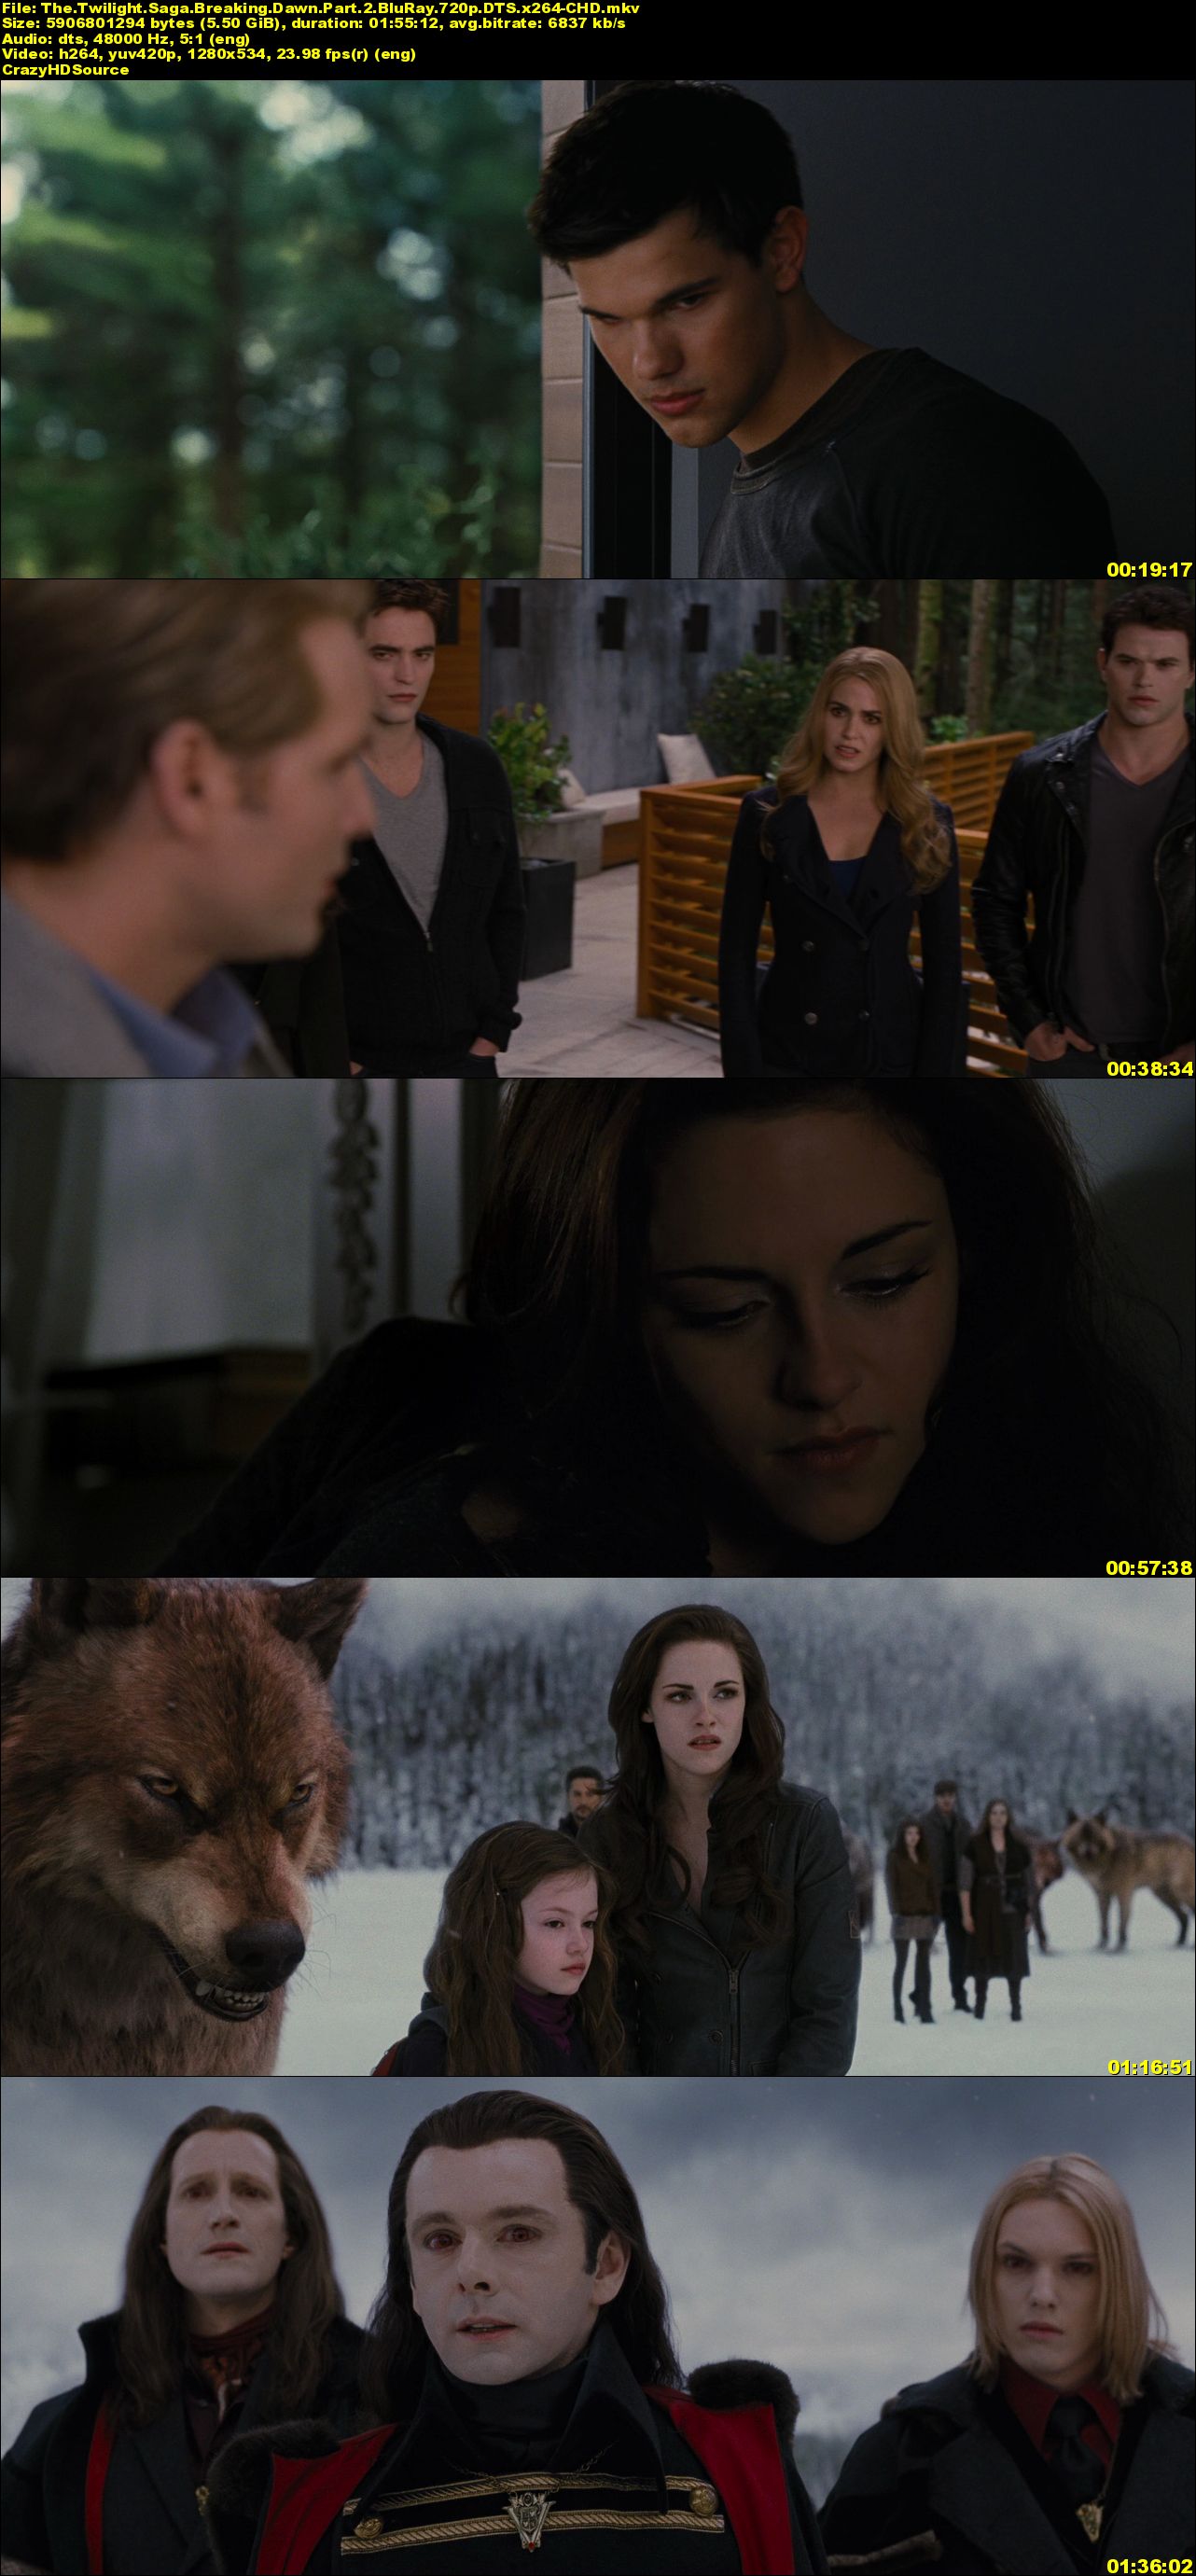 The Twilight Saga: Breaking Dawn, Part 2 download the new version for windows